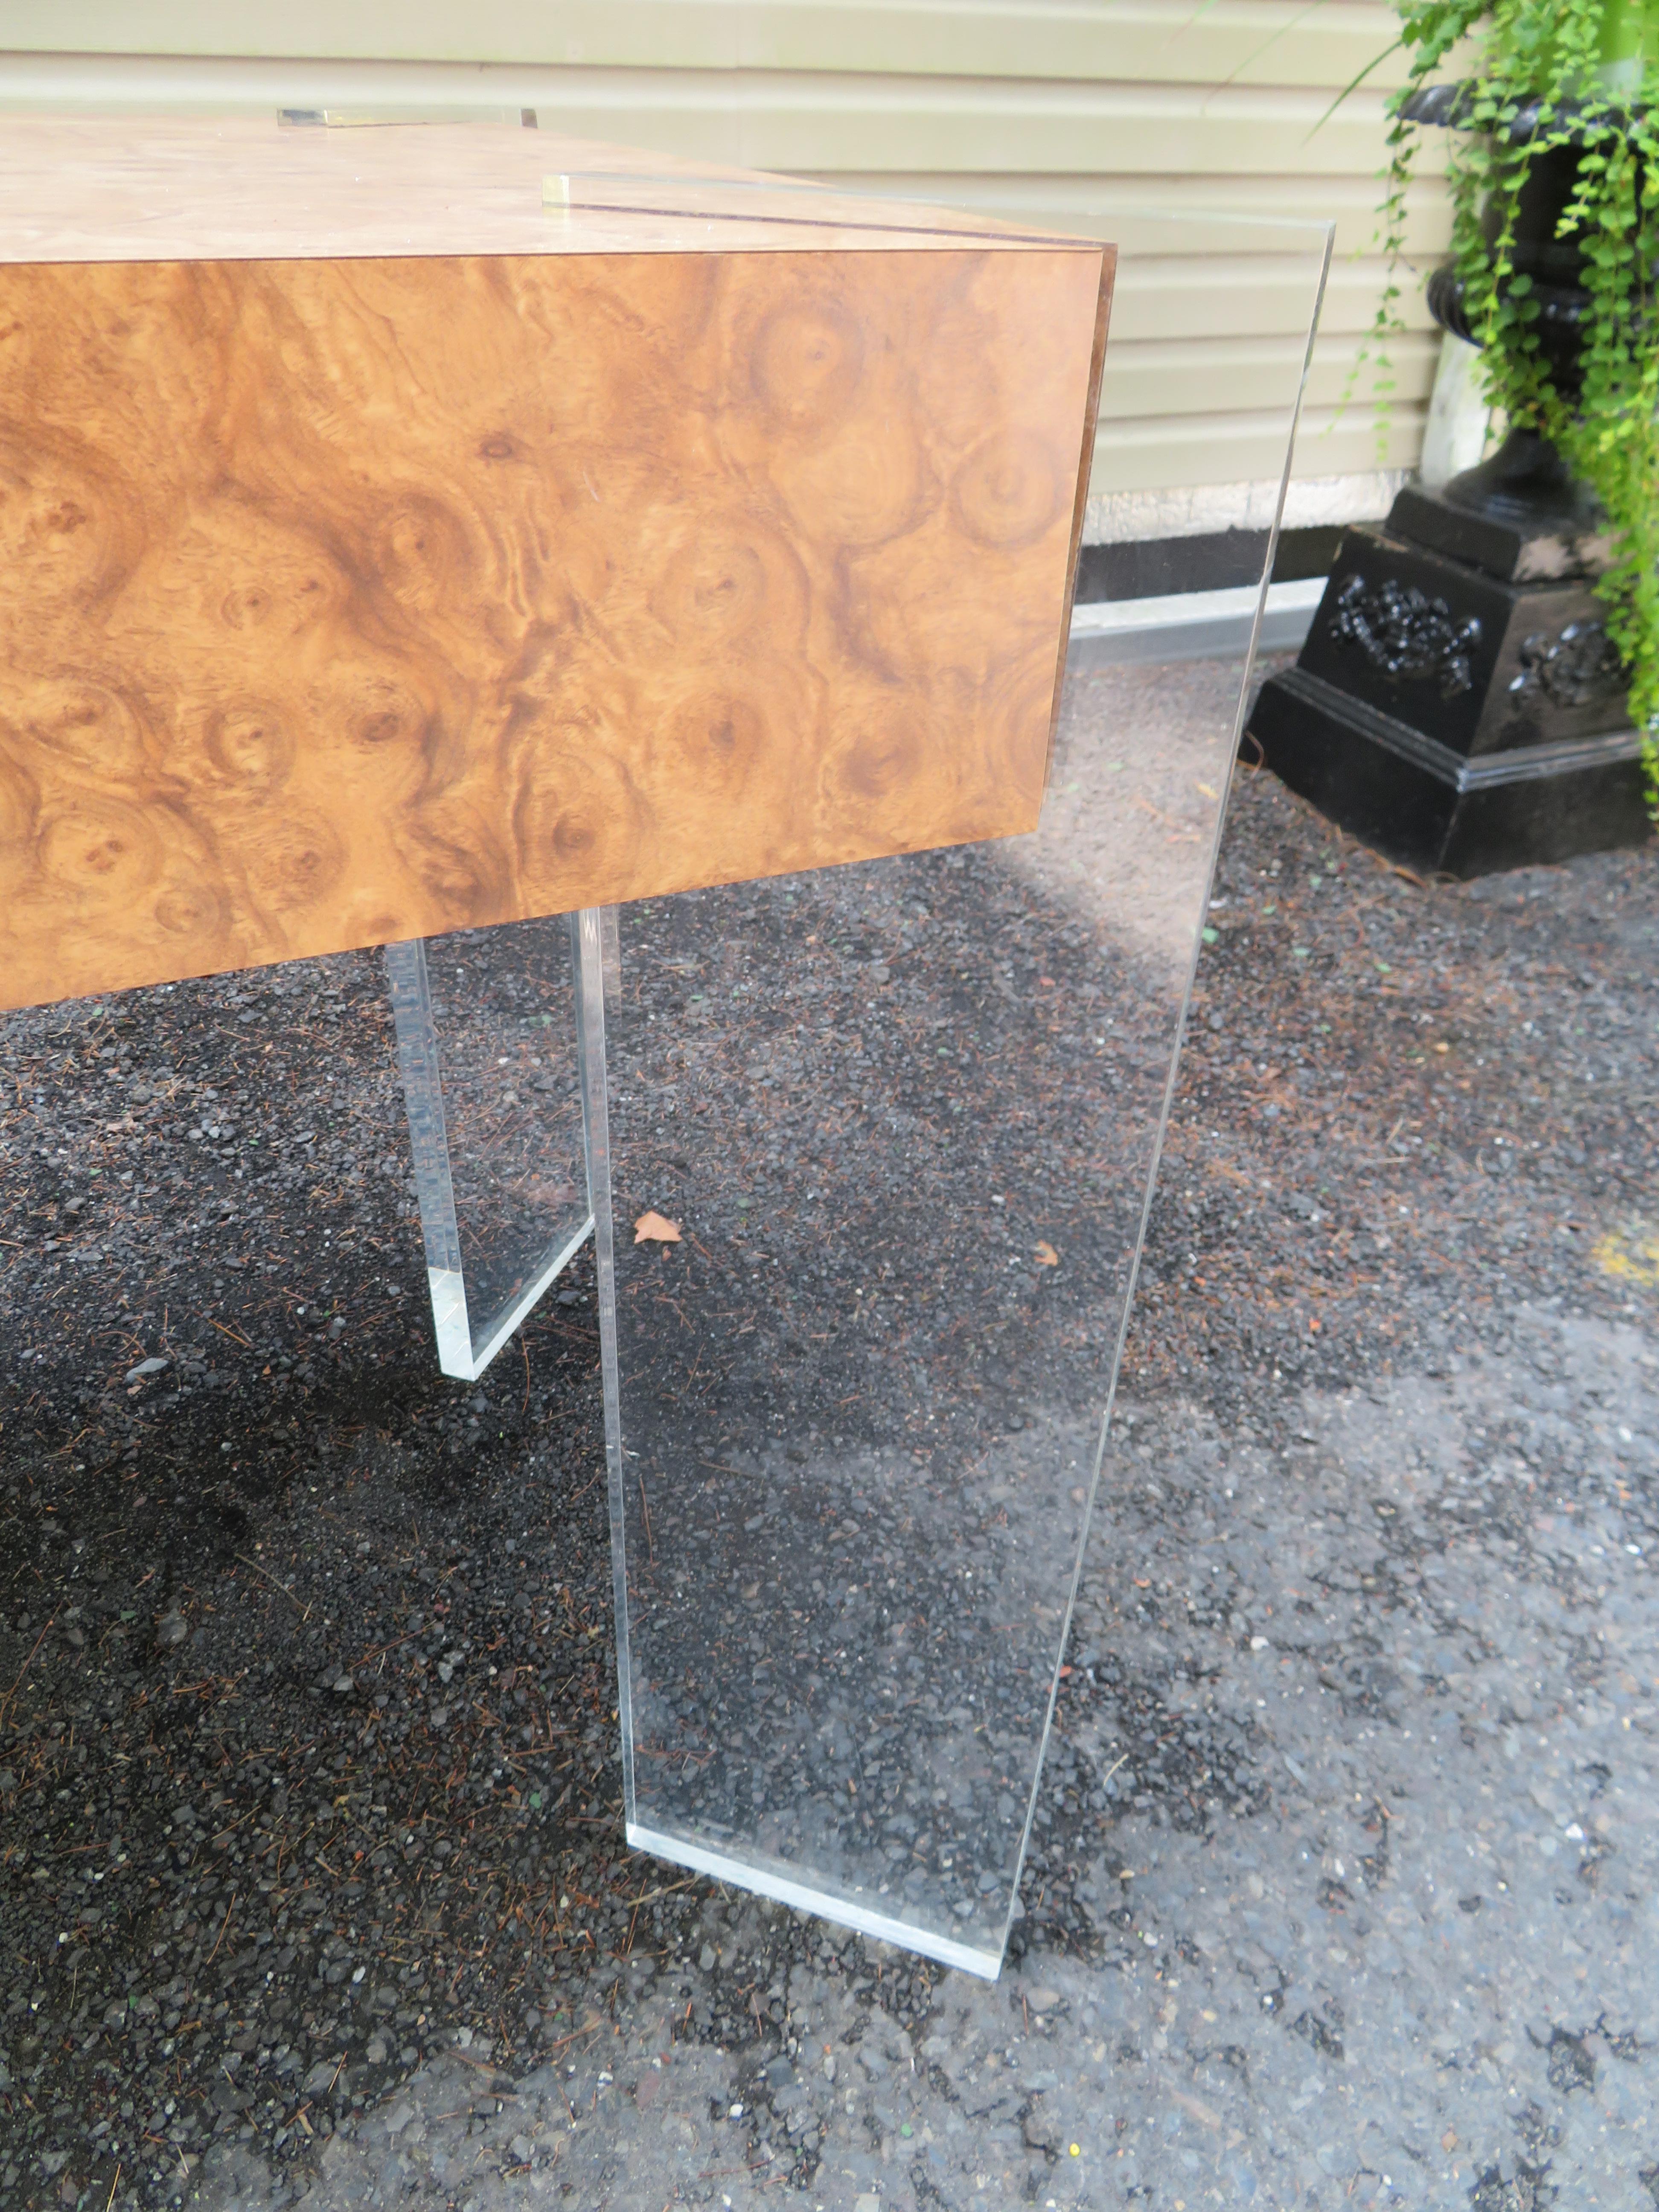 Handsome Burl Laminate Game Table Desk with Lucite Chair In Good Condition For Sale In Pemberton, NJ